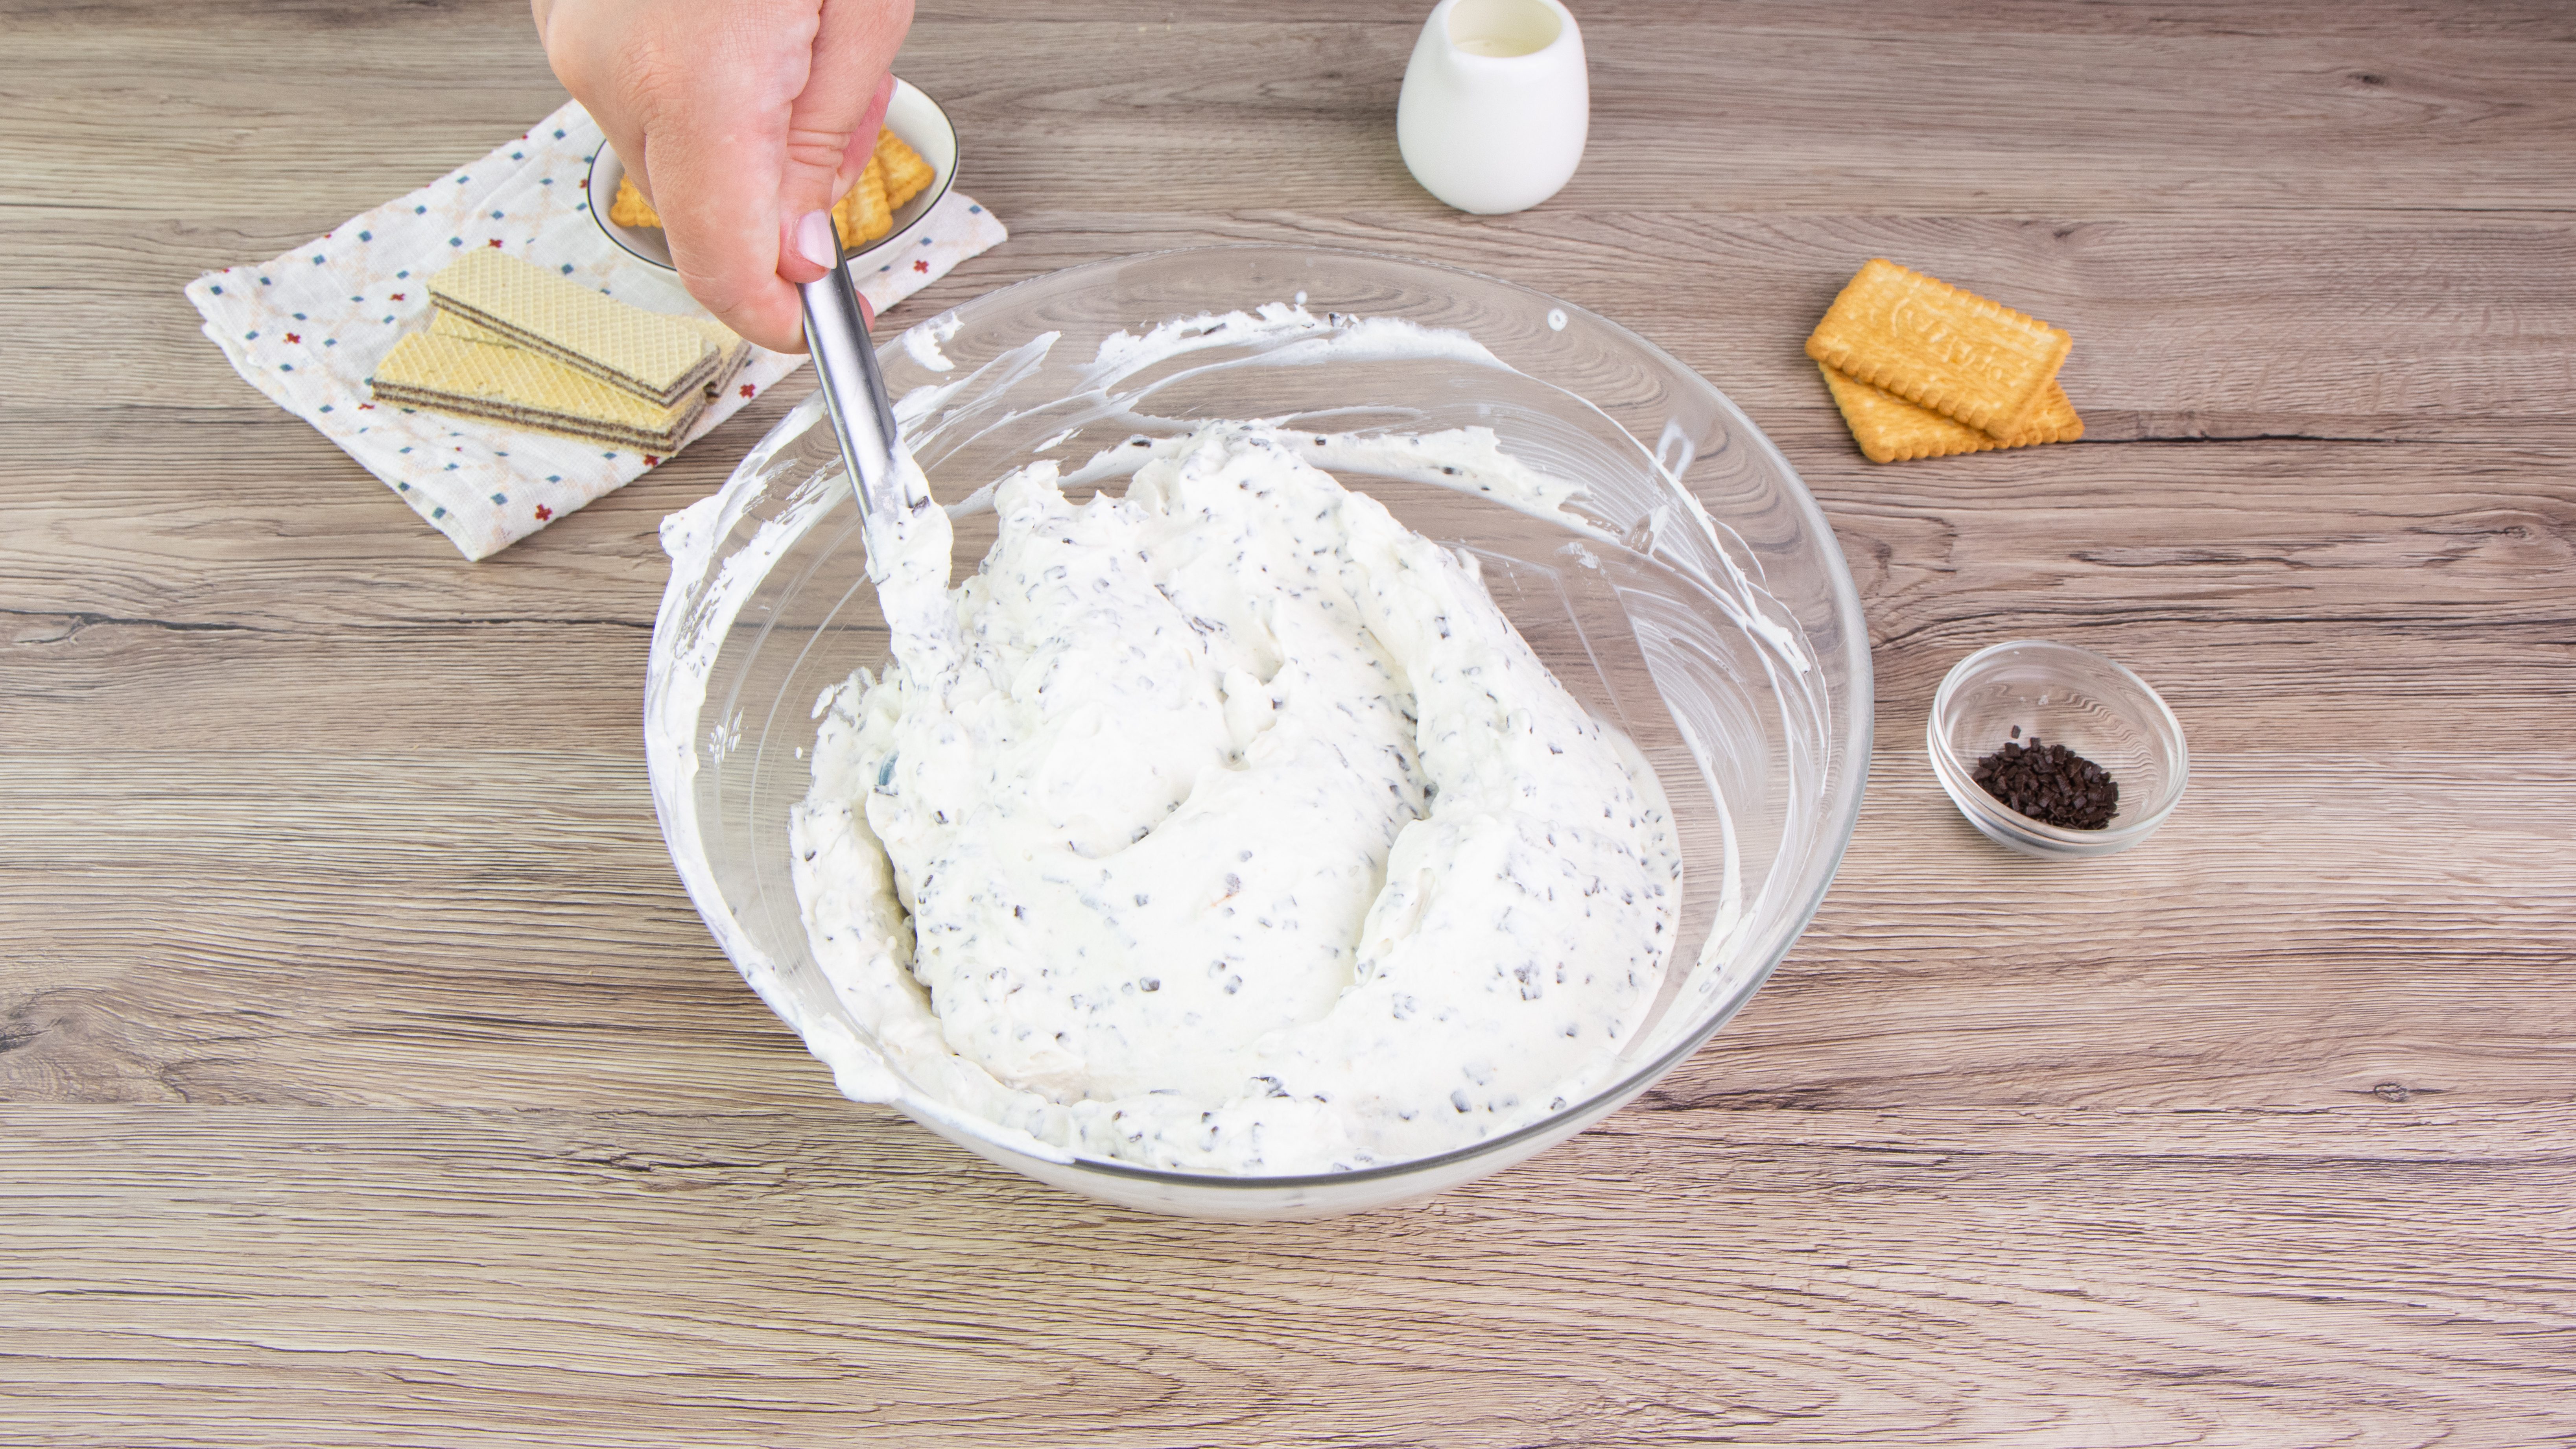 1659177051 542 Stracciatella ice cream biscuits the recipe for making them at - August 20, 2022